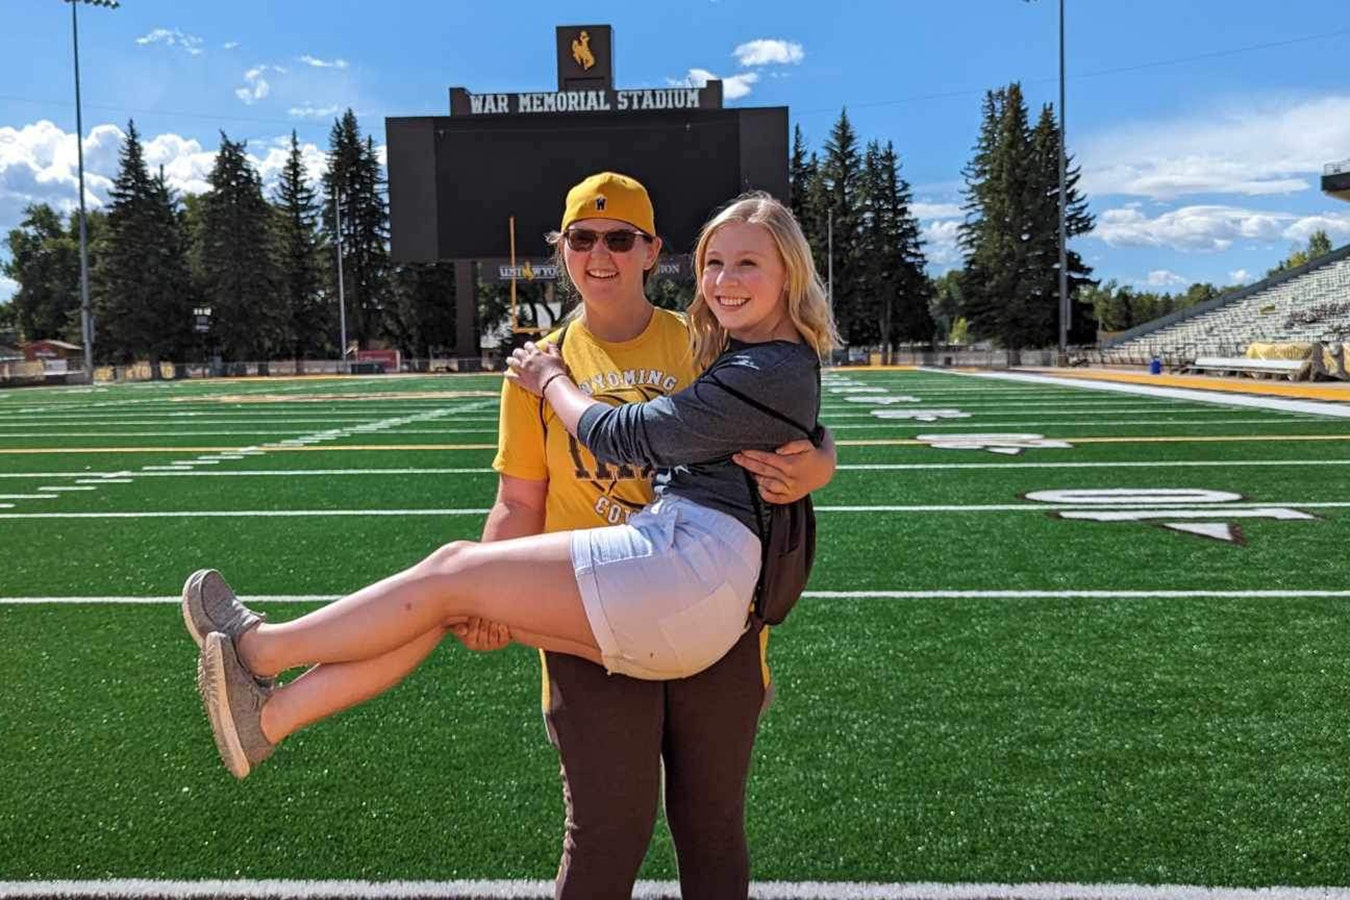 Brindi Brittain holds Adrian Wood as they get a private tour of the University of Wyoming athletics facility after presenting to P.E. teachers in Laramie.